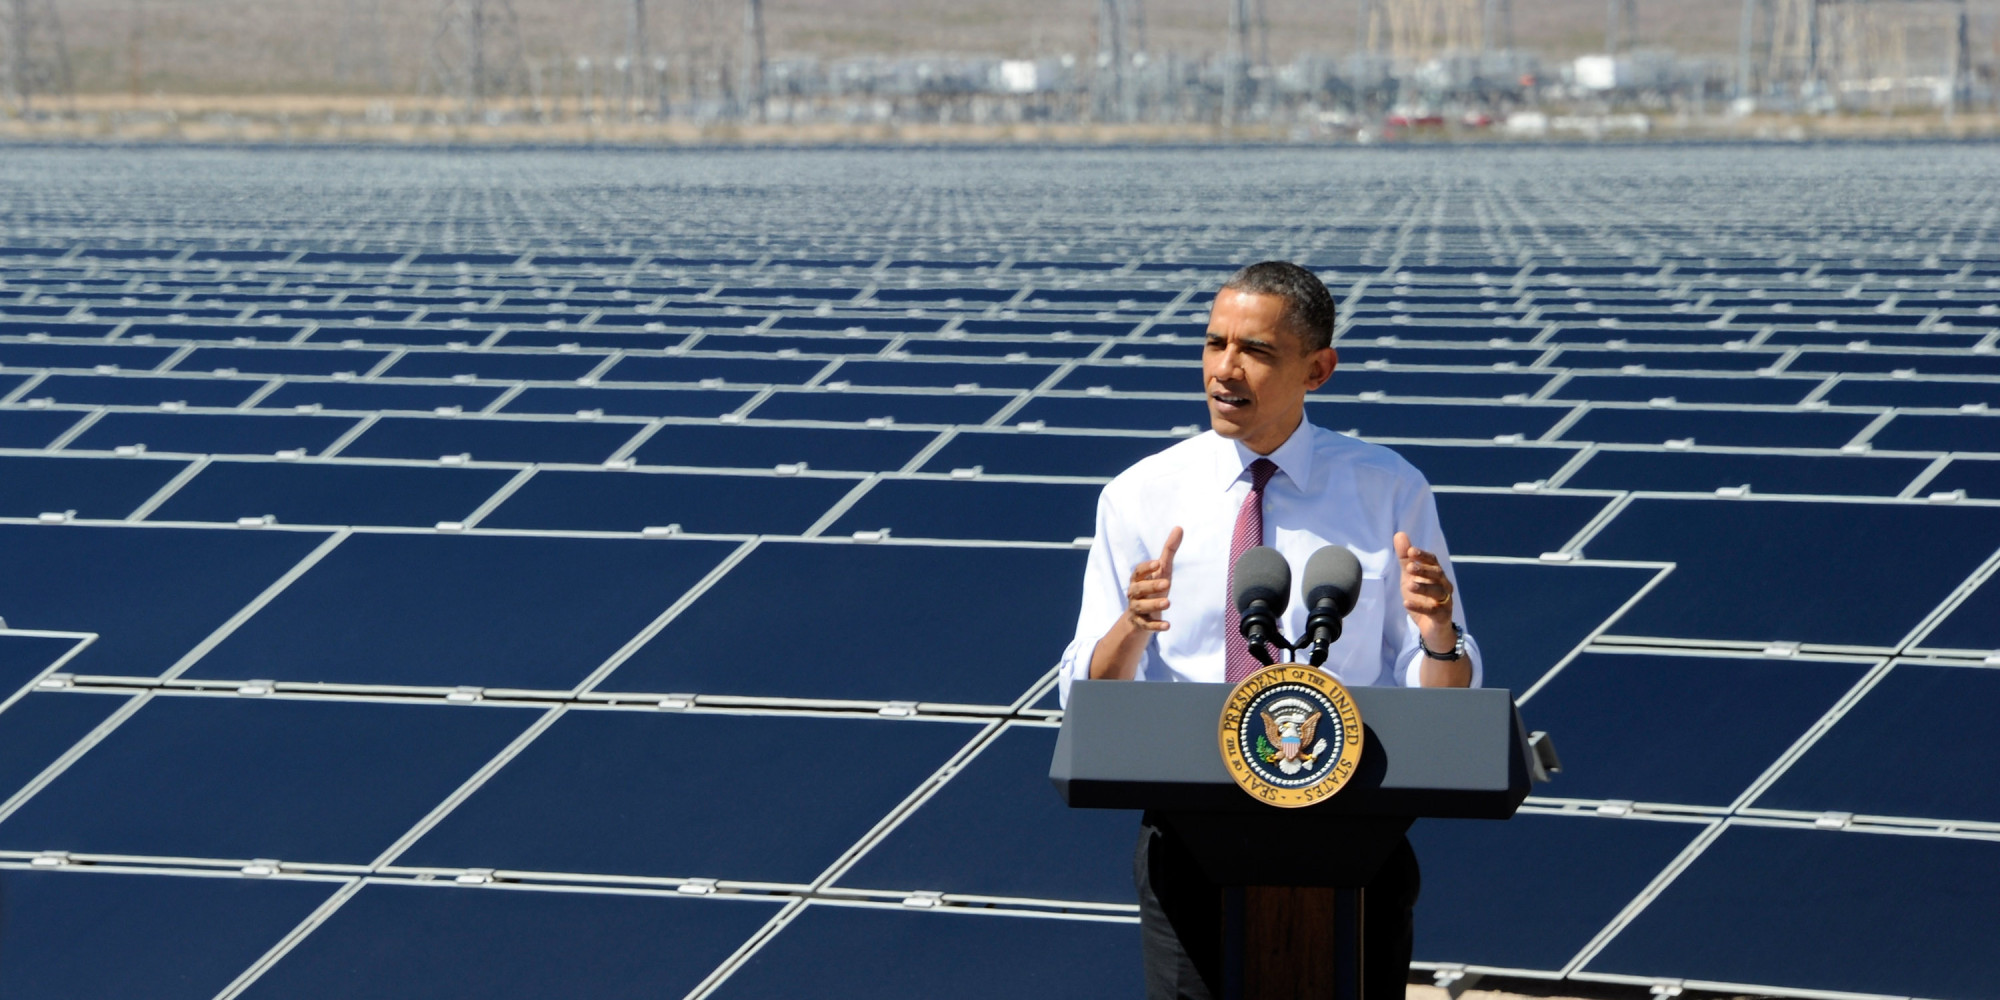 white-house-solar-panels-are-finally-up-huffpost